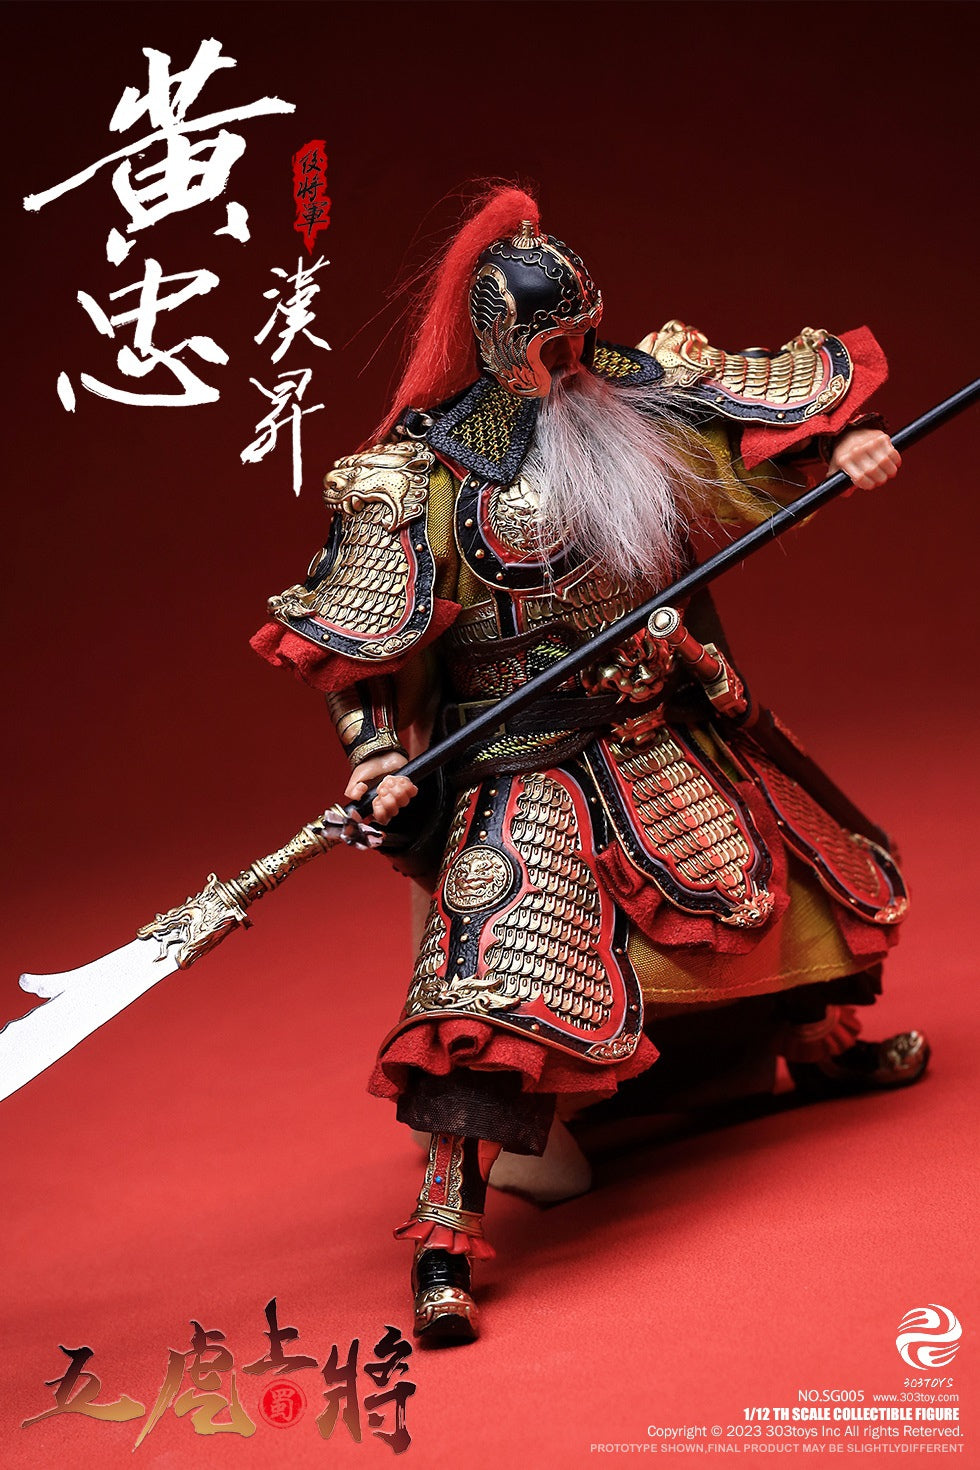 303 Toys - SG005 - Three Kingdoms on Palm Series - The Five Tiger Generals 五虎上將 - Huang Zhong (Han Sheng) 黃忠 (漢升) -後將軍- (Deluxe Ver.) (1/12 Scale) - Marvelous Toys